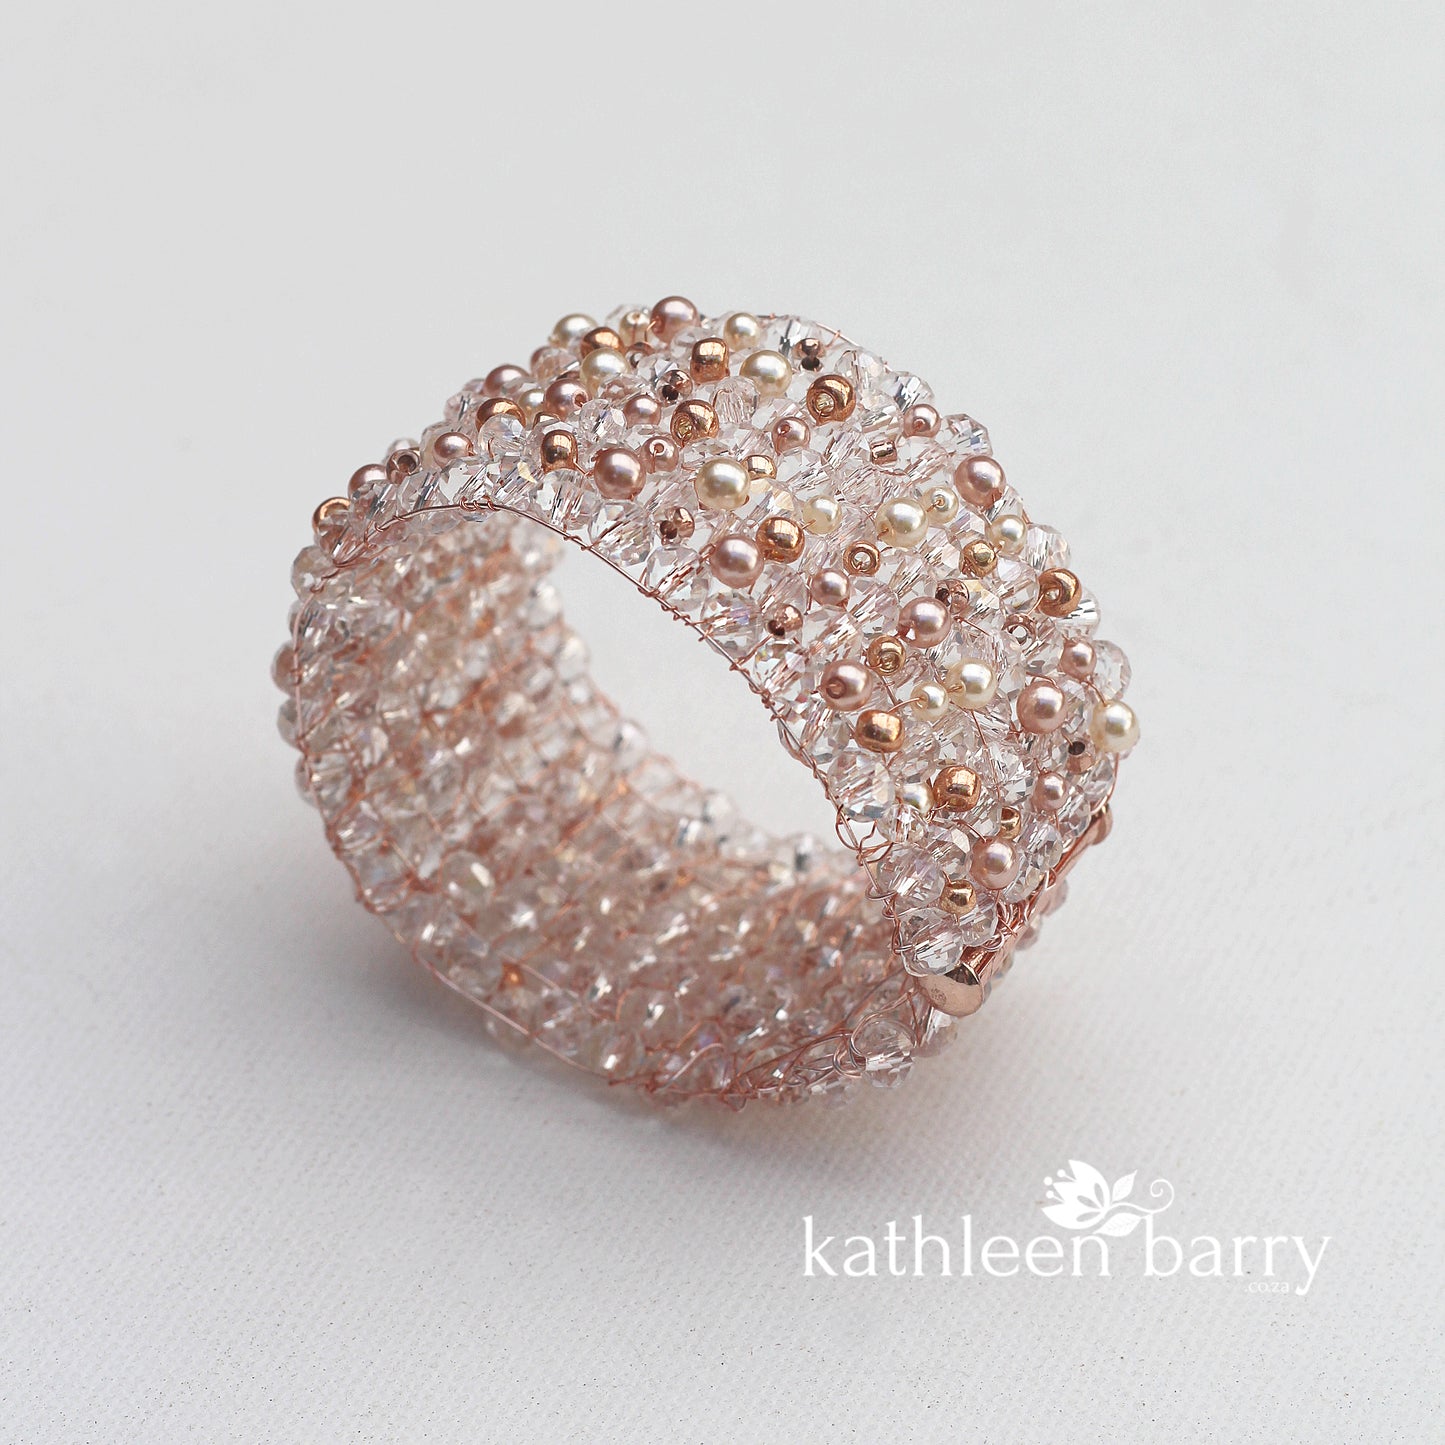 Lara crystal pearl cuff bracelet - Available in Gold, Silver or Rose Gold